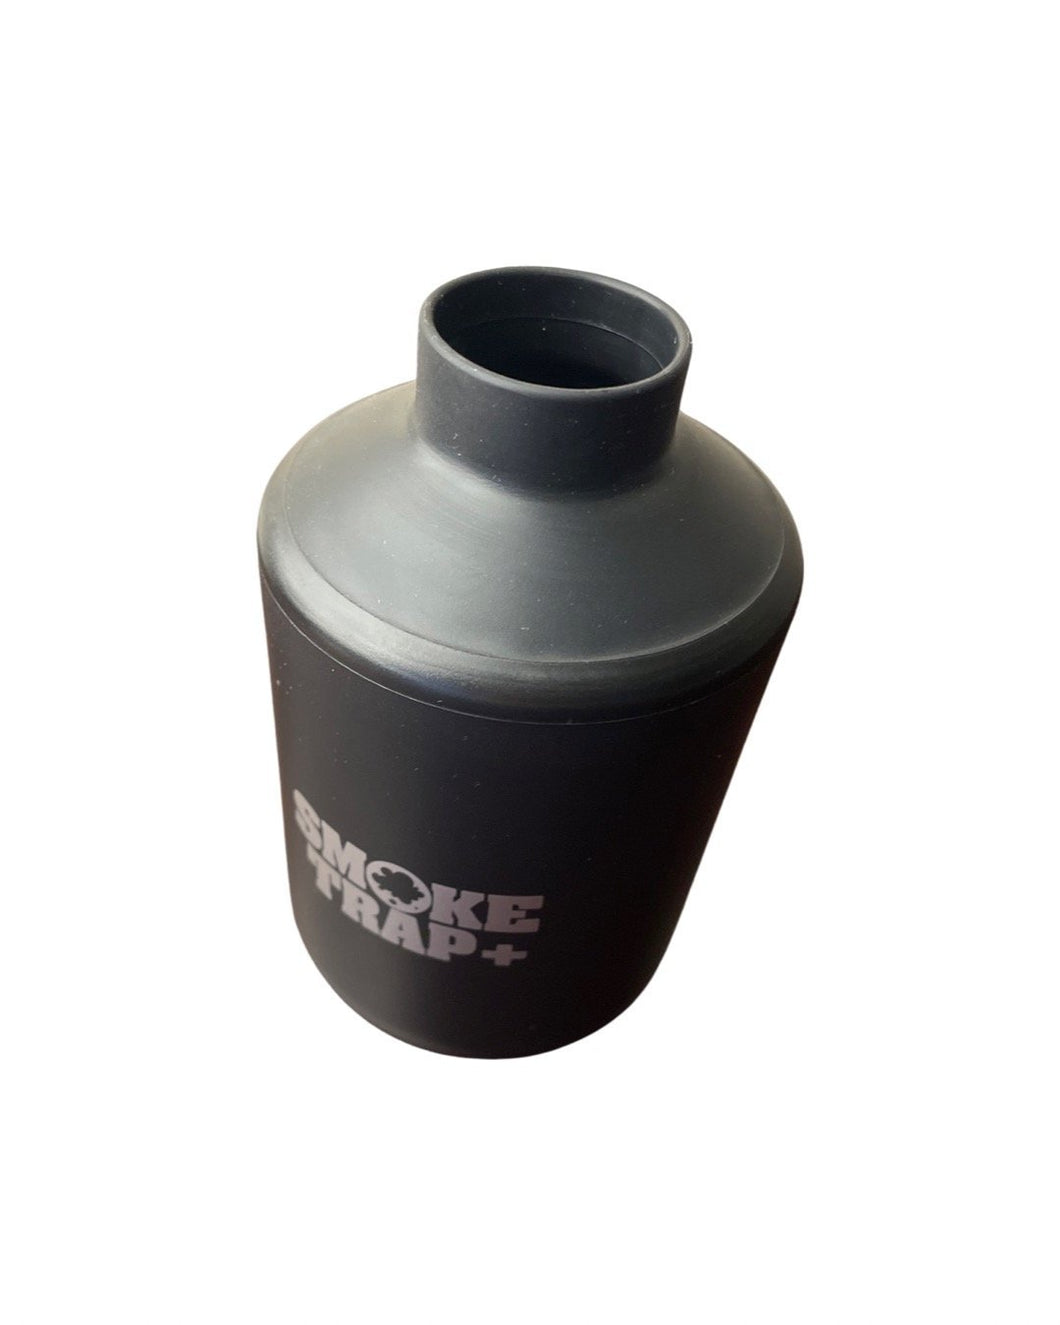 Introducing Smoke Trap +  The Newest Personal Air Filter By Smoke Trap 